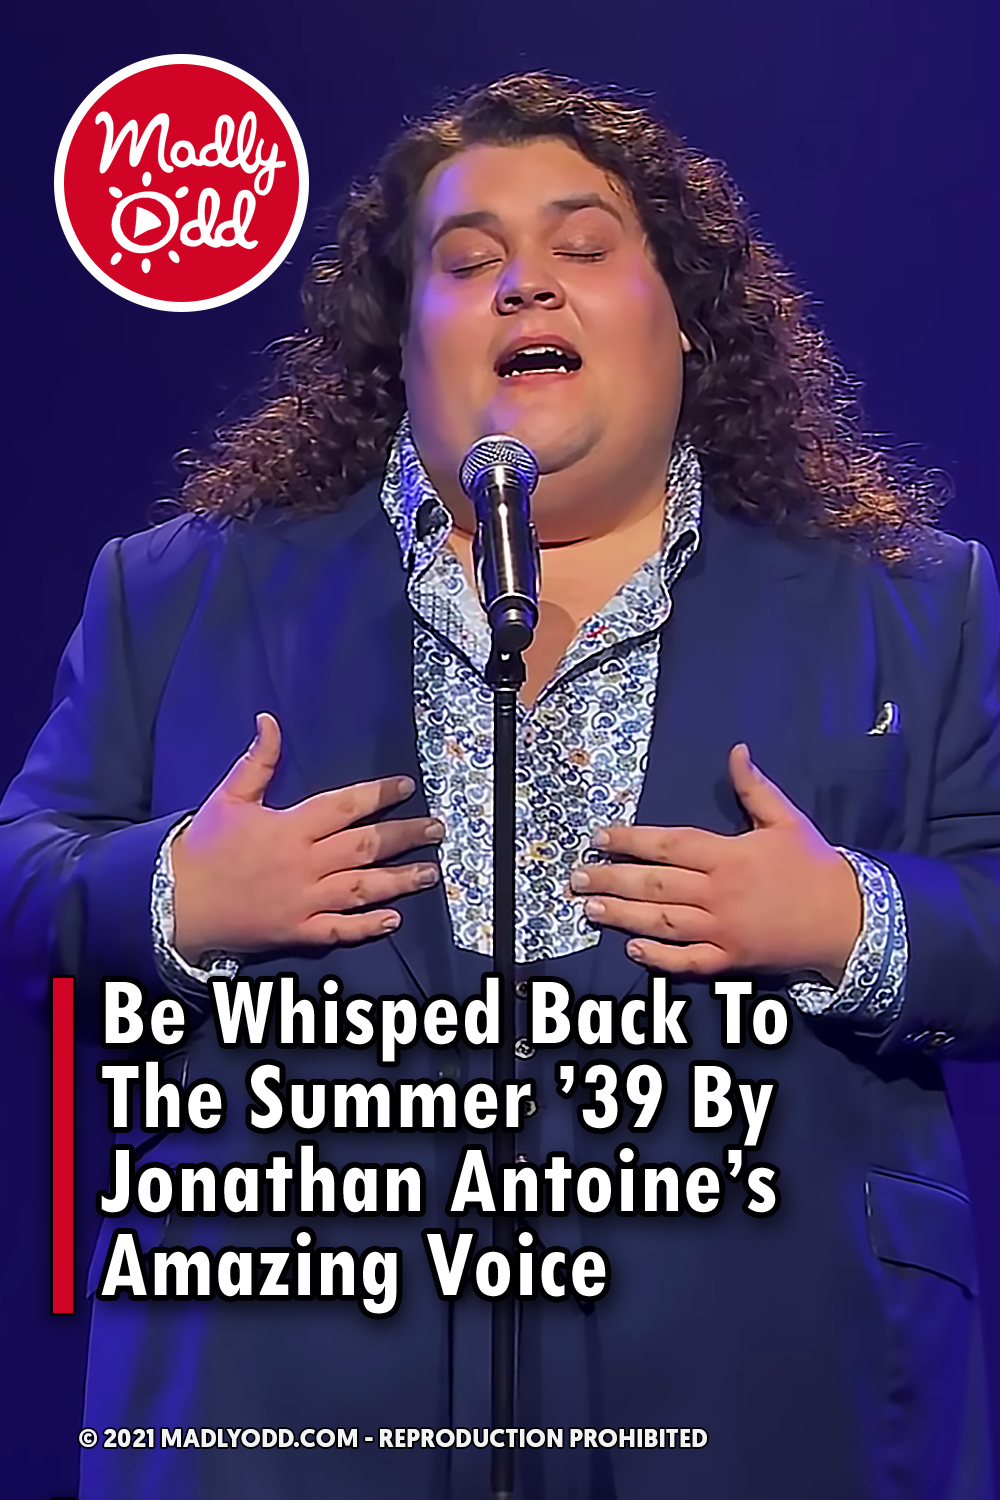 Be Whisped Back To The Summer \'39 By Jonathan Antoine\'s Amazing Voice